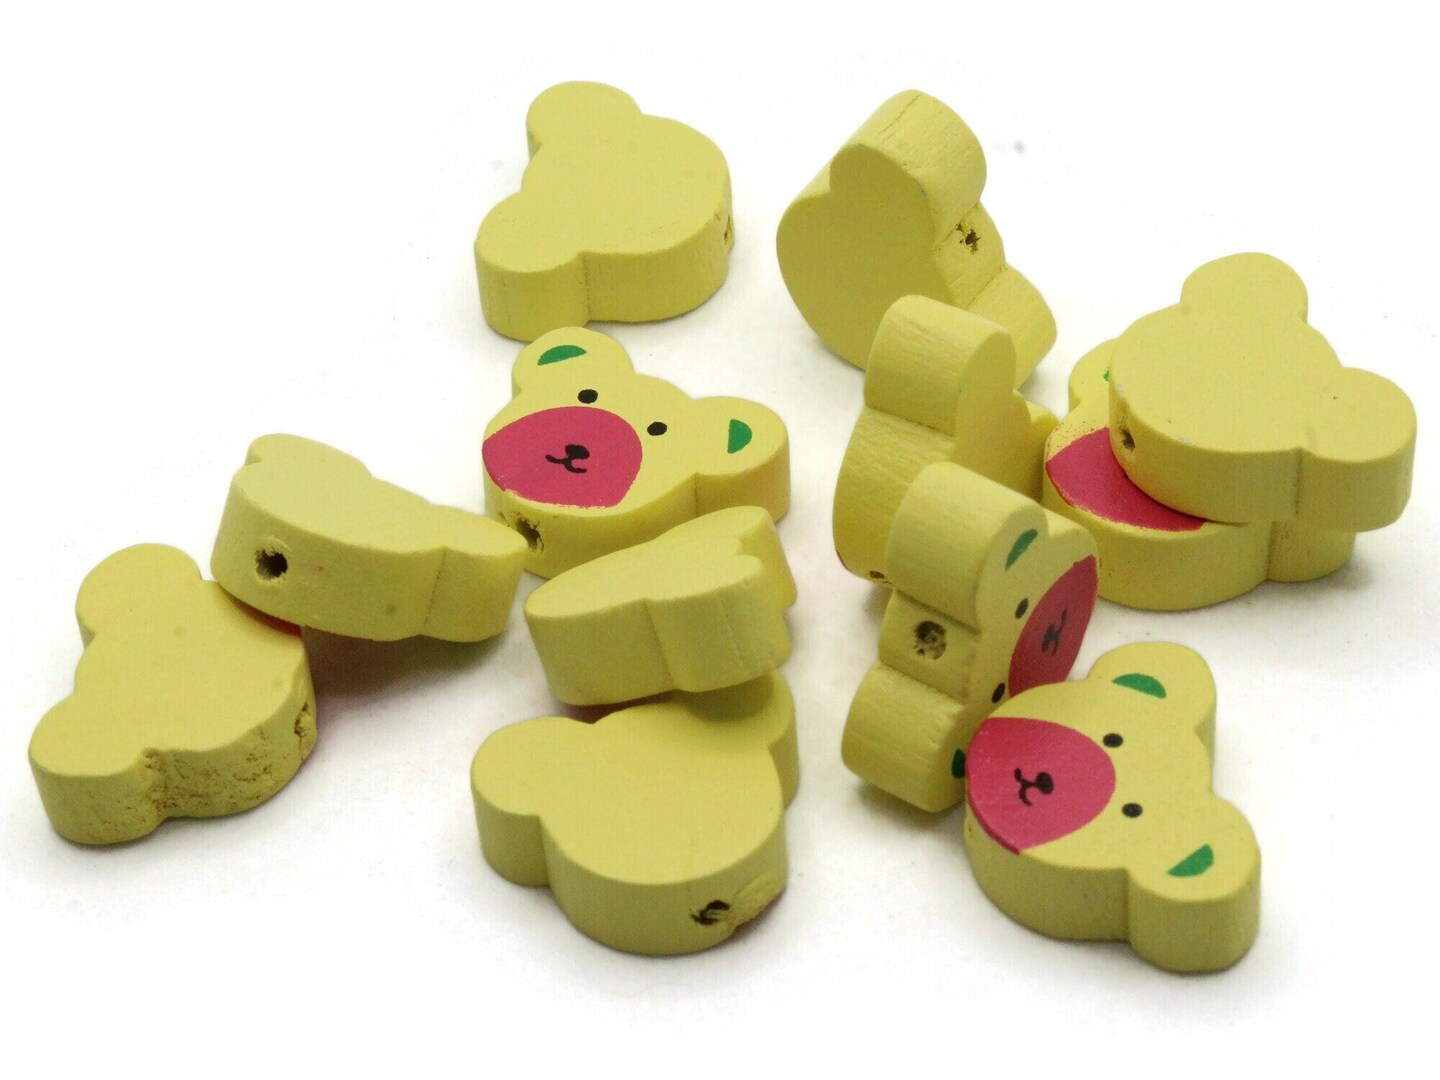 12 15mm Yellow and Pink Wooden Teddy Bear Beads